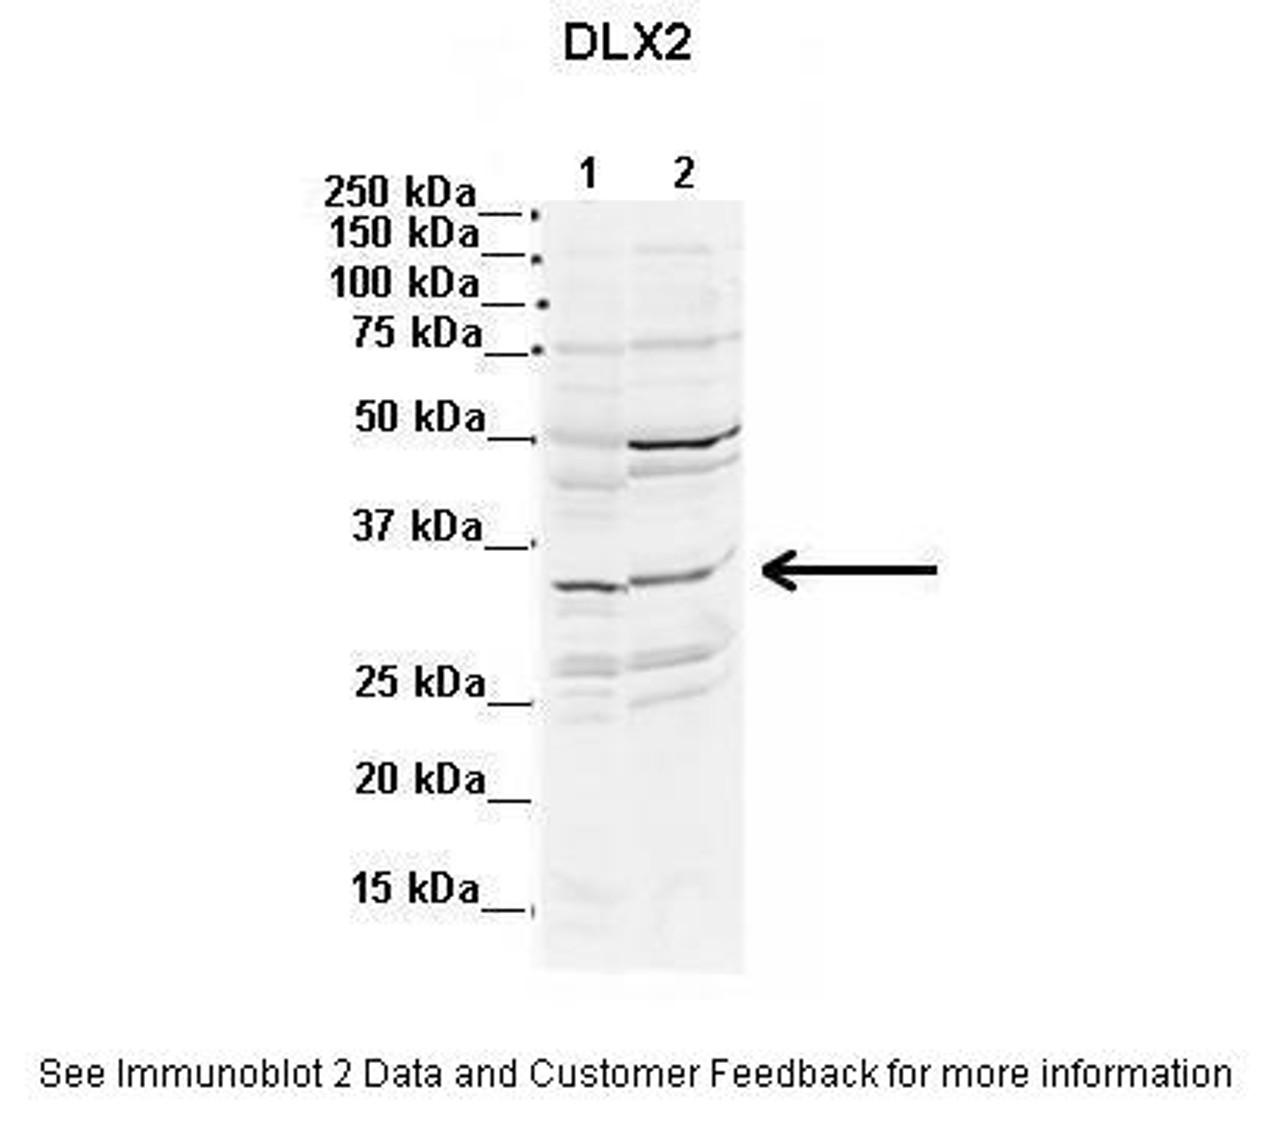 Antibody used in WB on Mouse, Rat 2 ug/ml (Lanes: 1. Mouse WT brain extract (80ug) 2. Rat brain extract (80ug) ) .